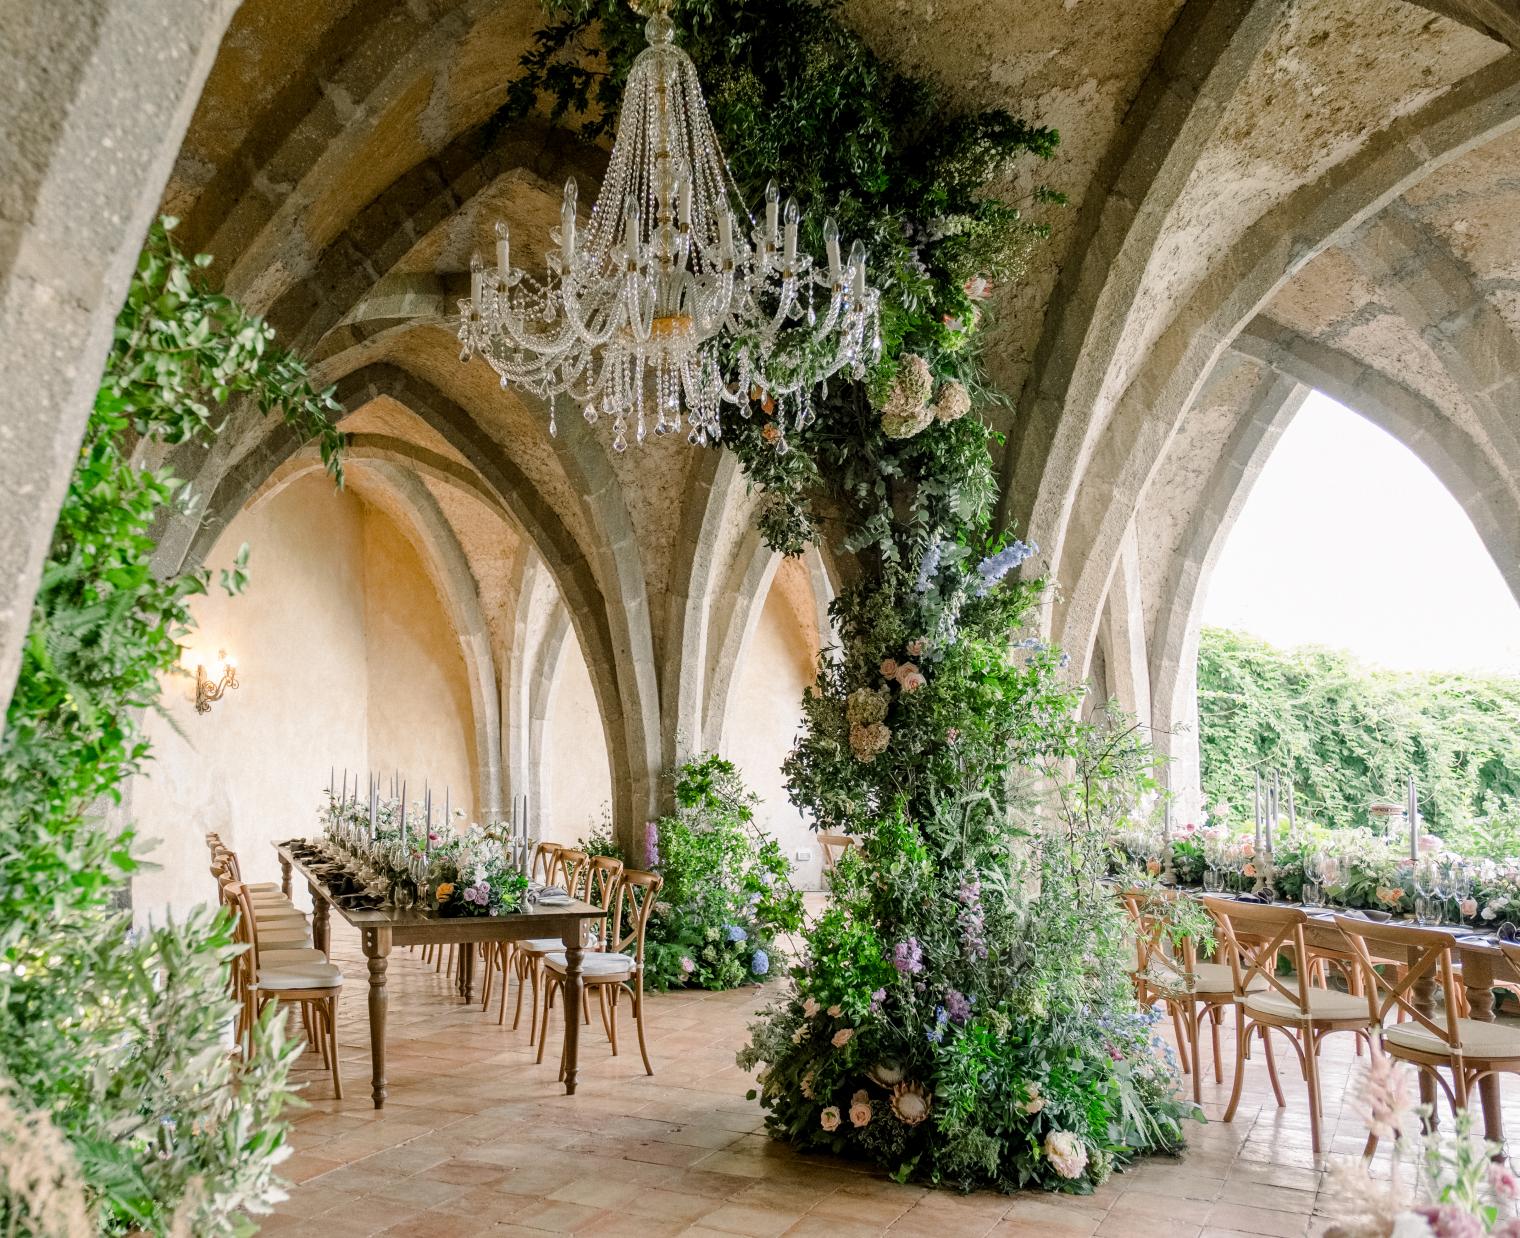 28 of the Best Wedding Venues Across the World According to These  Professional Photographers